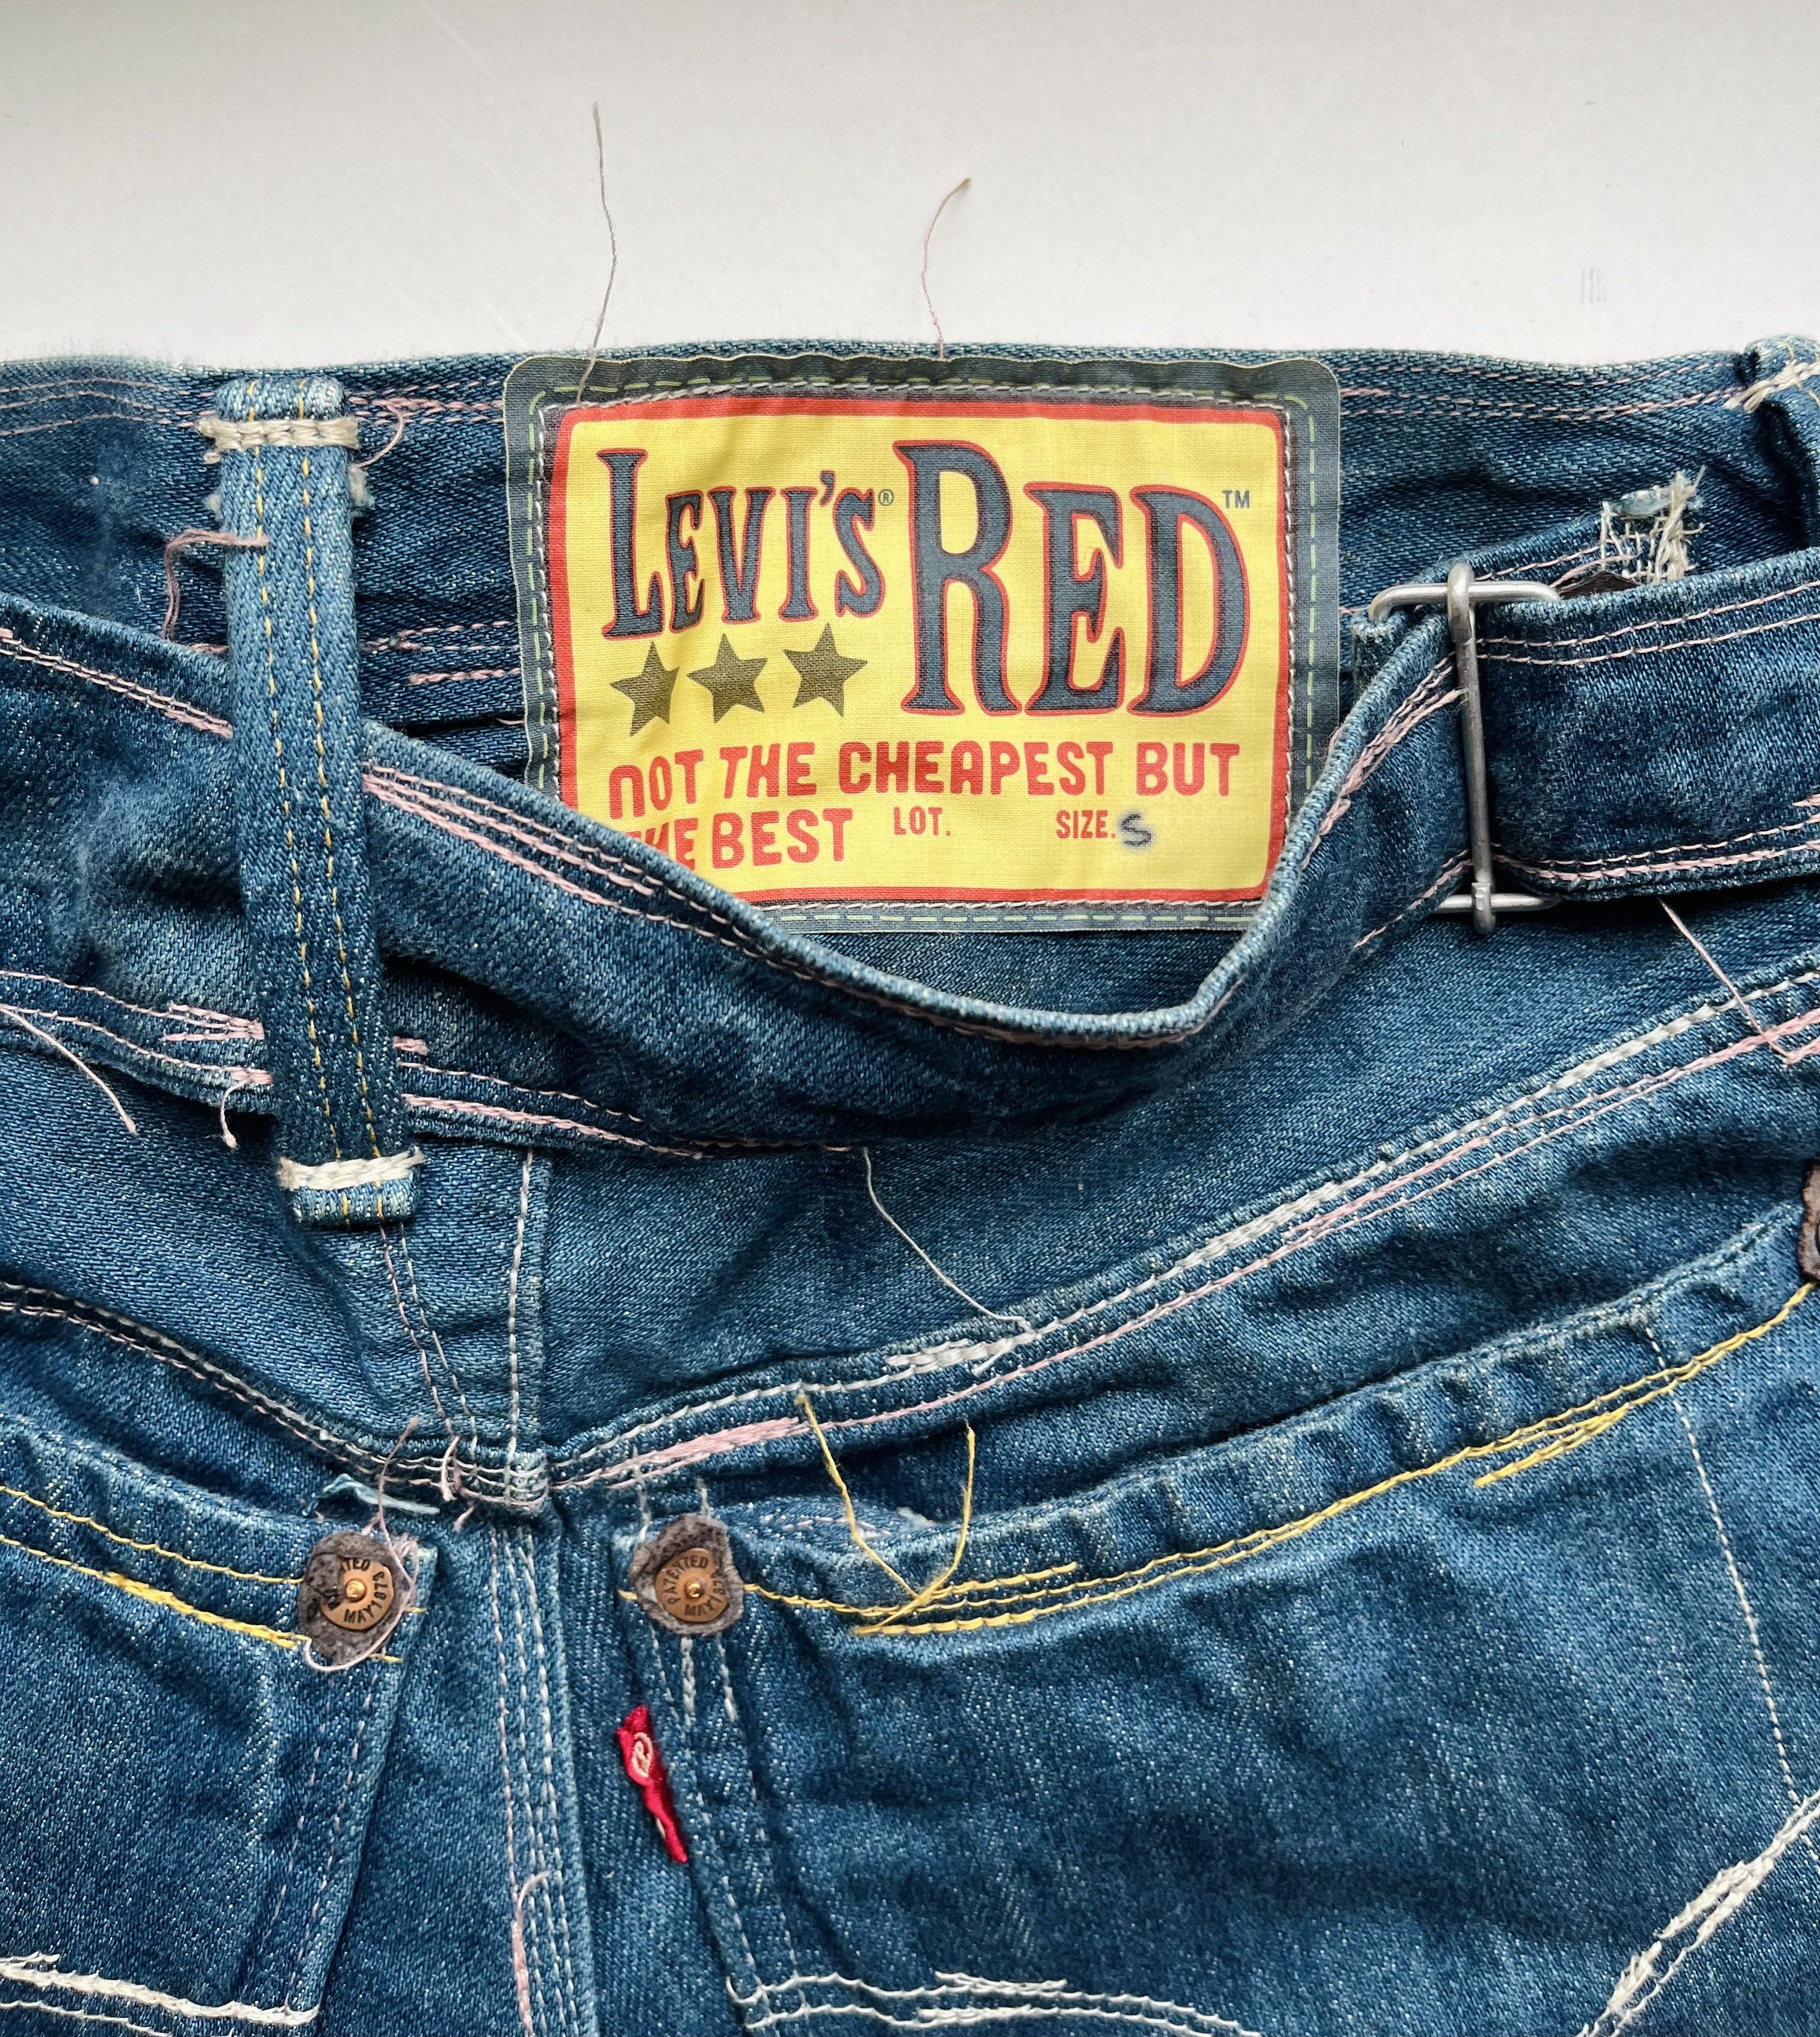 Levi's LEVI'S RED EDITION 2008AW BAGGY JEANS | Grailed